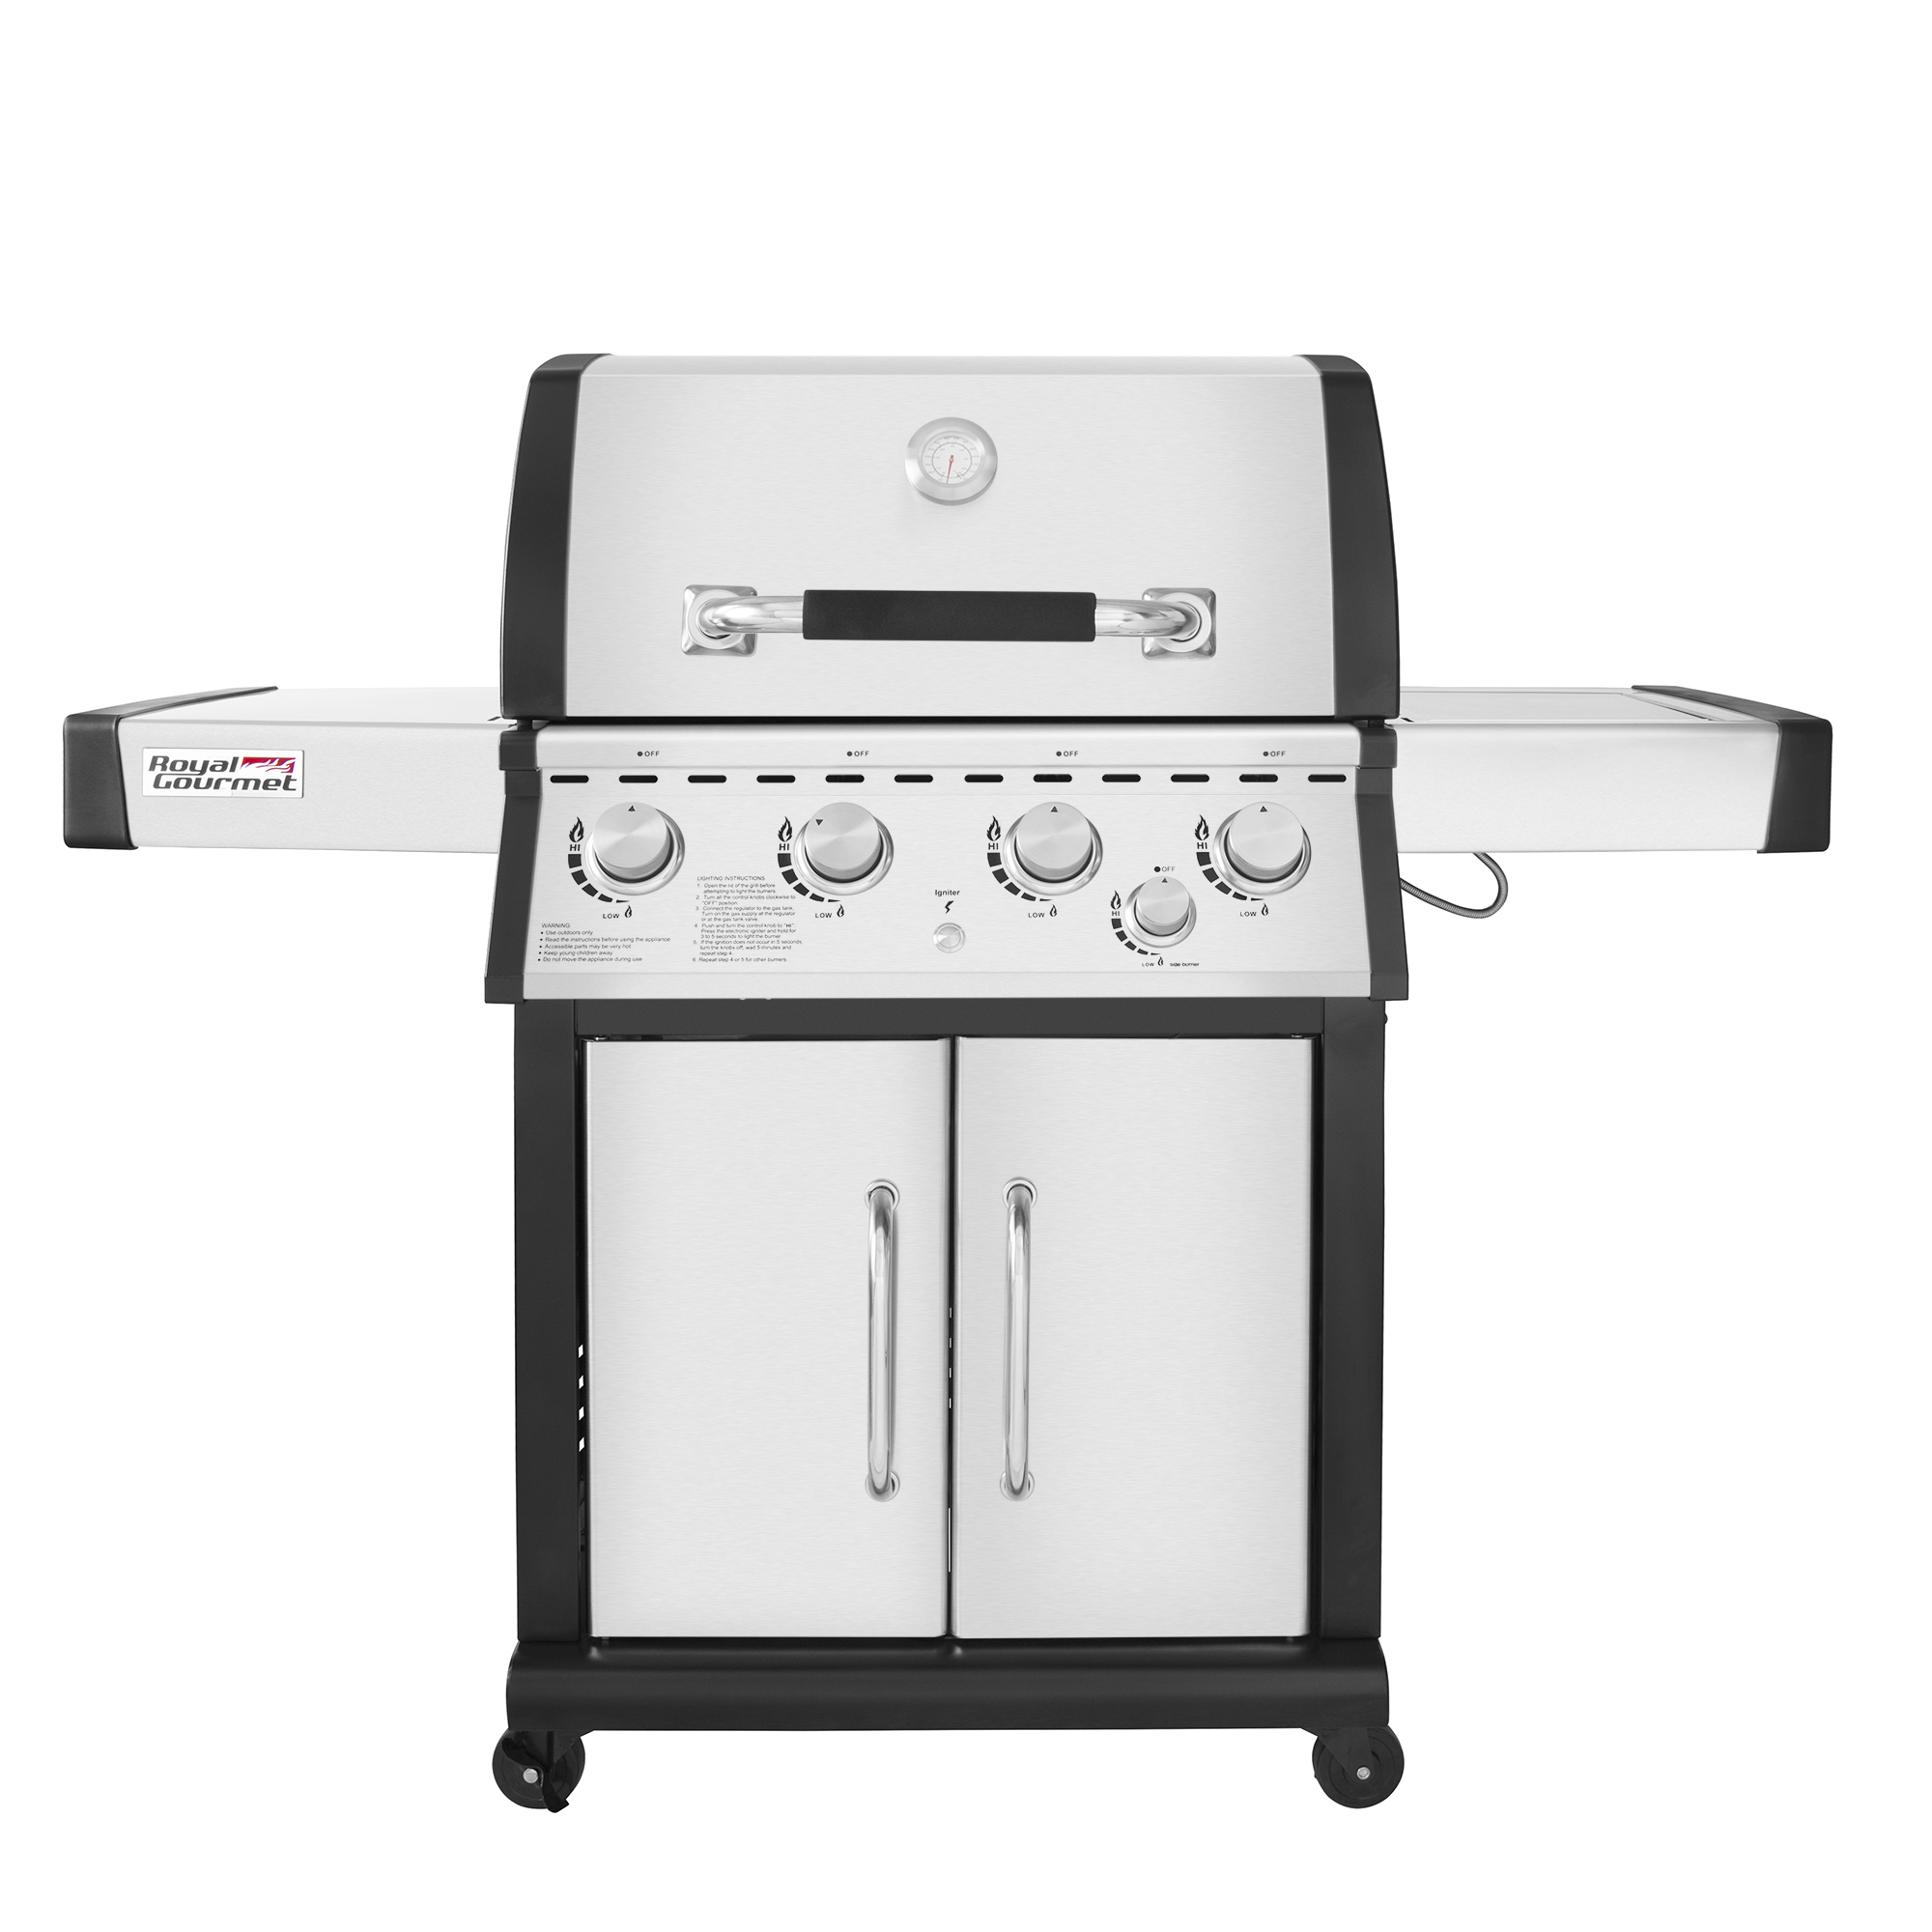 Royal Gourmet MG4001 4-Burner Propane Gas Grill with Side Burner, Stainless Steel, 60000 BTU - image 1 of 7